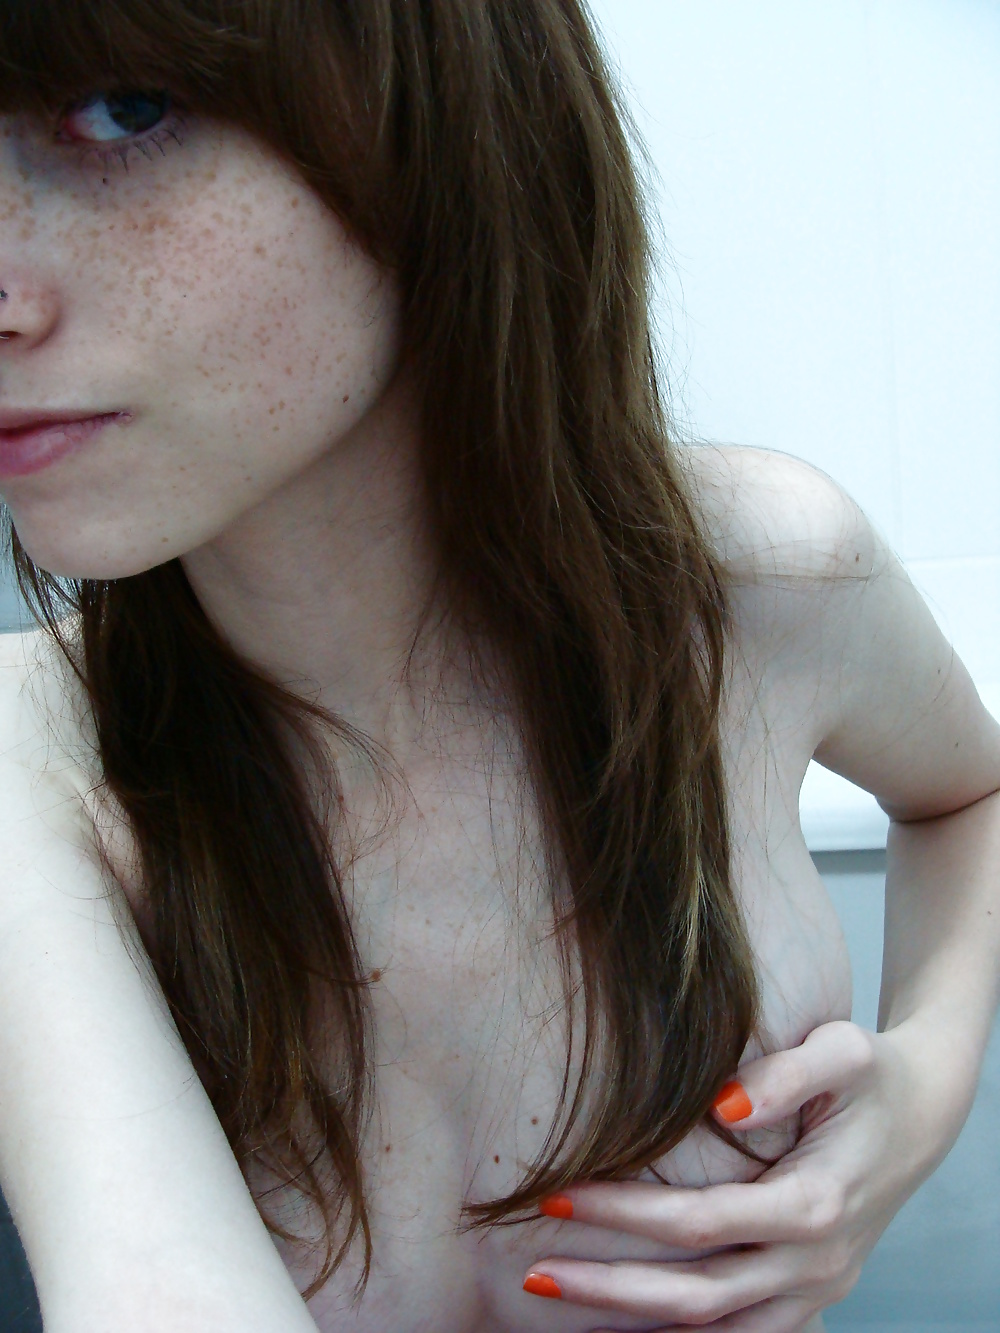 Awesome Redheads Girl With Freckles #38661122